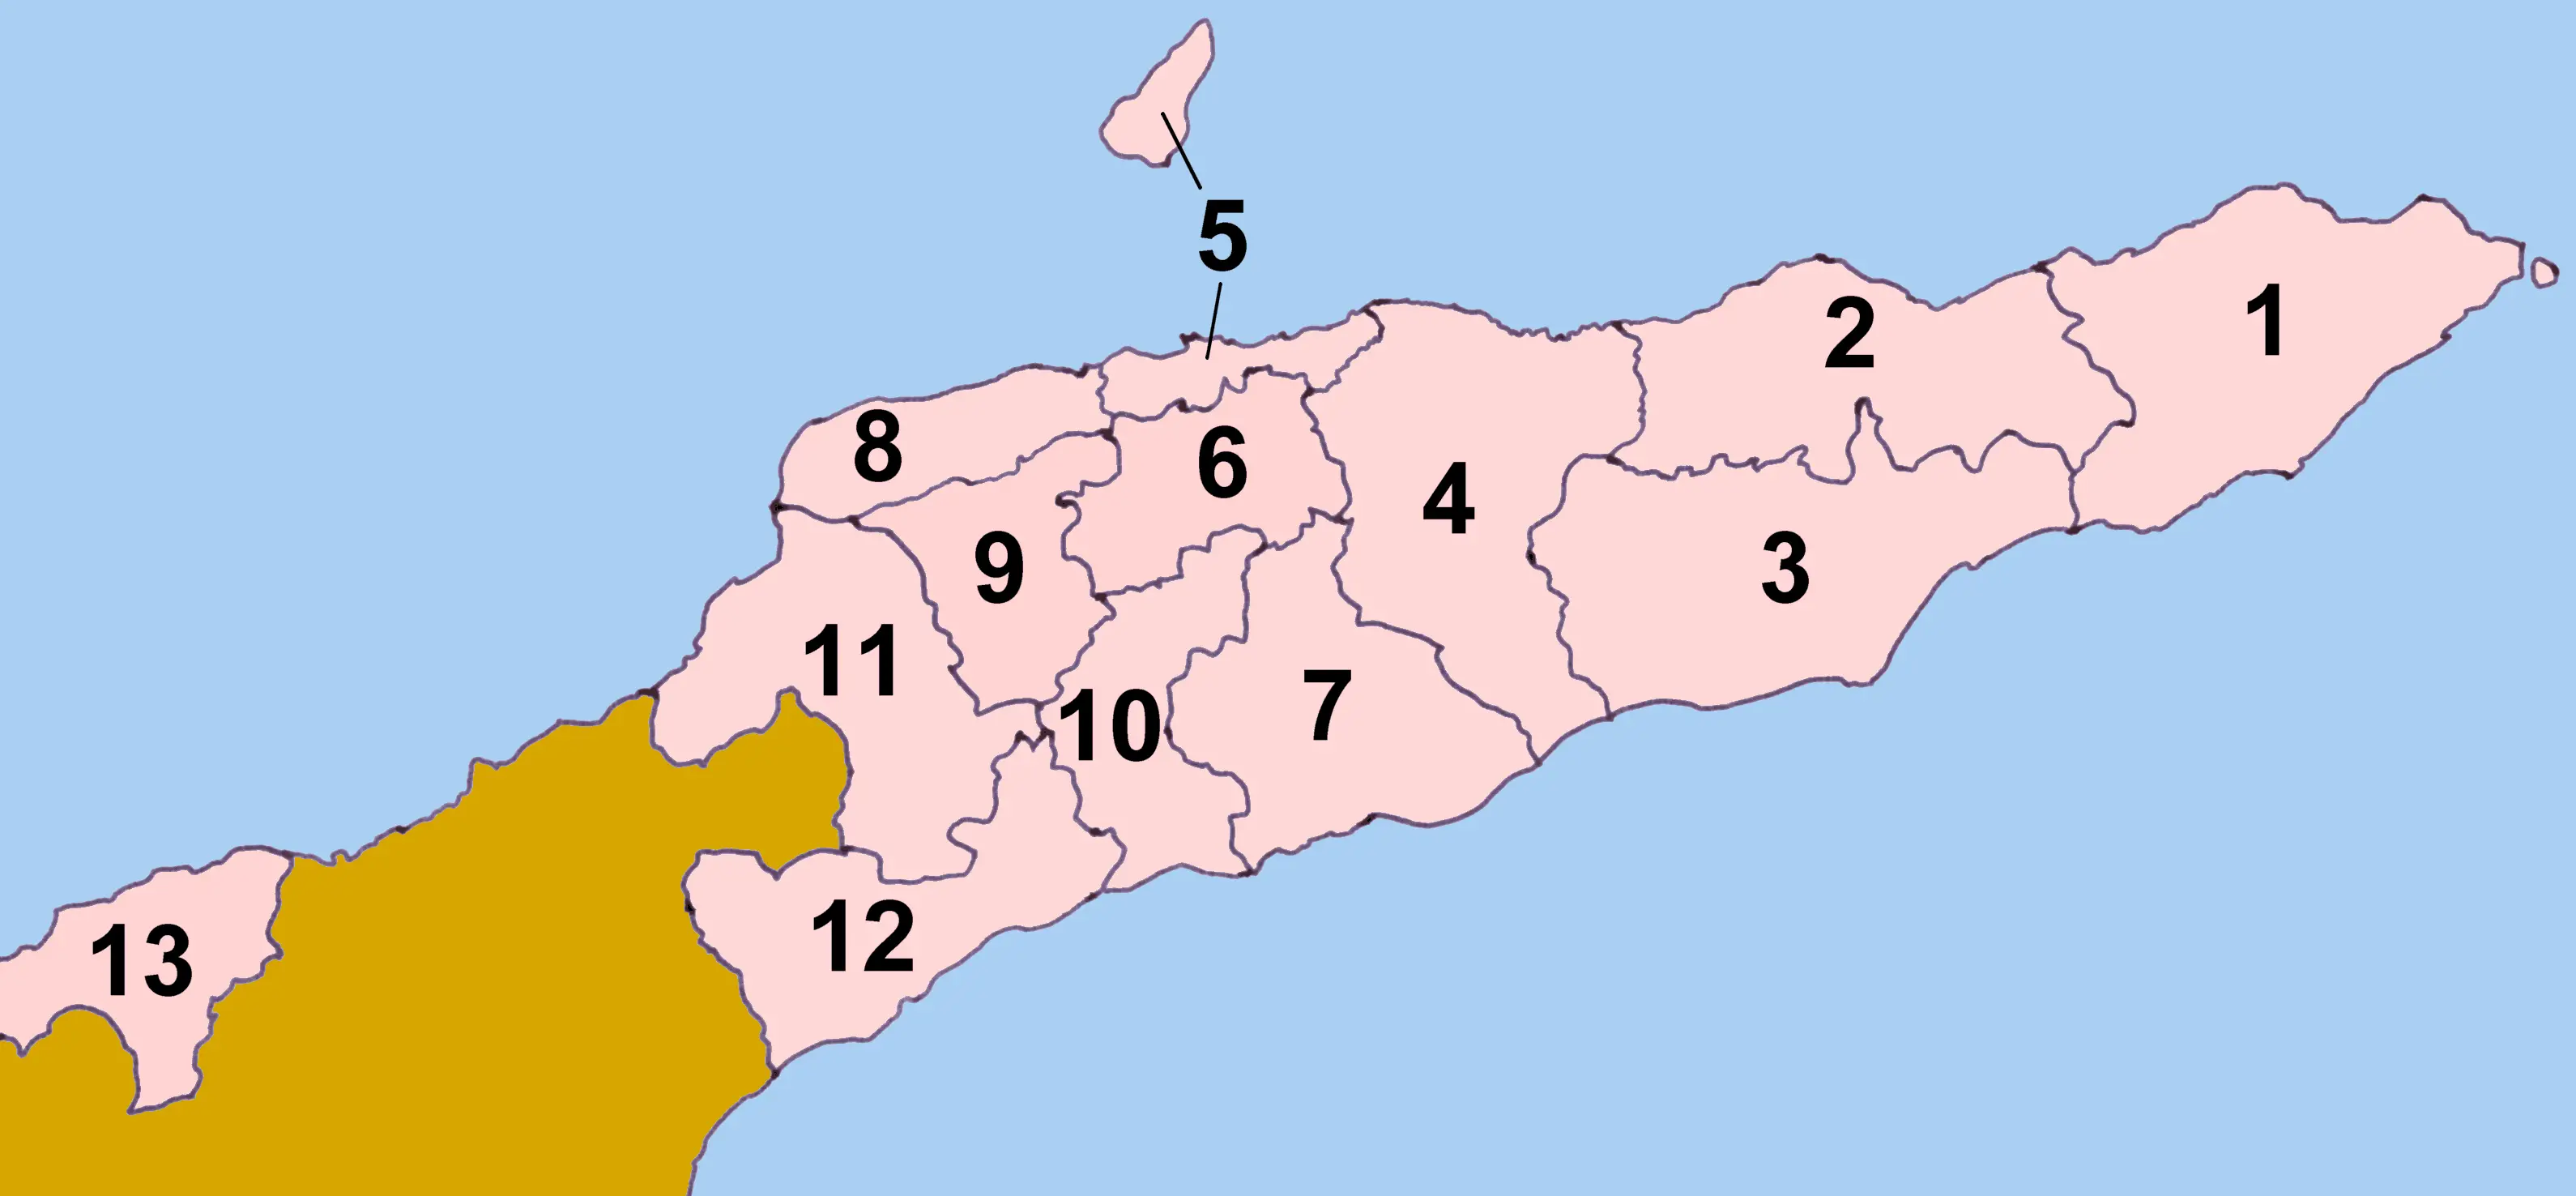 Timor Leste Districts Numbered